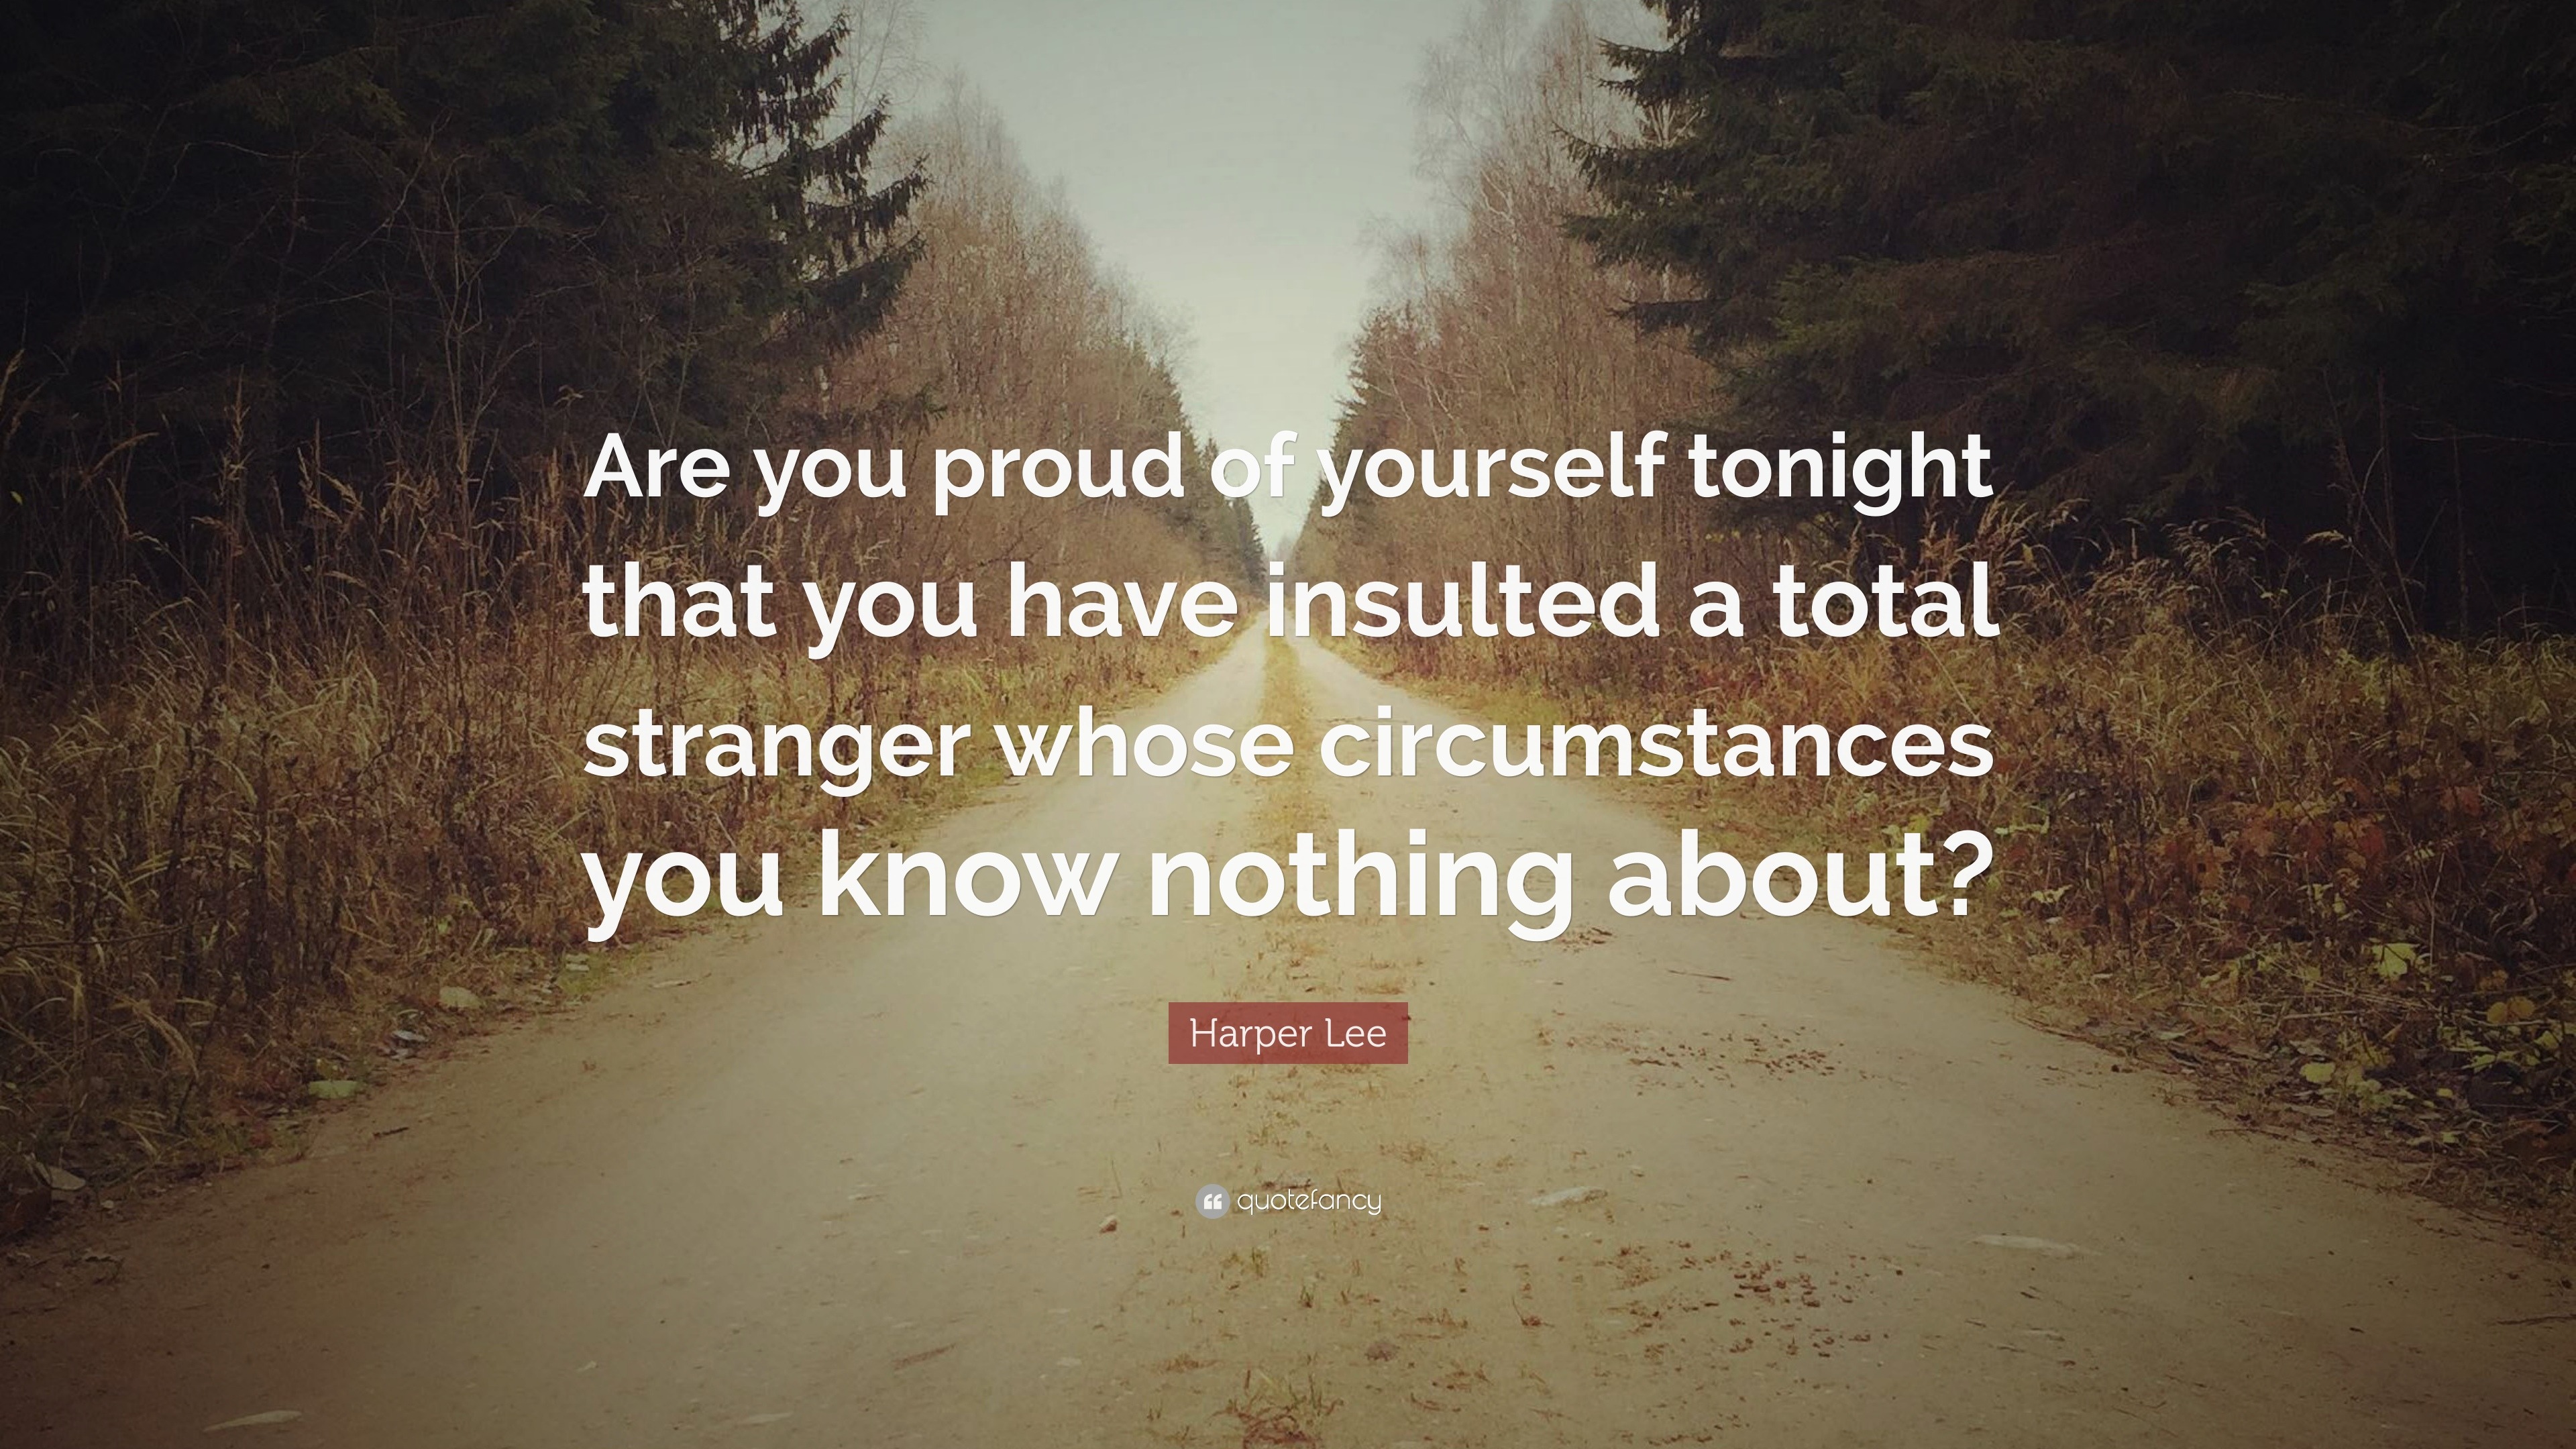 Harper Lee Quote “Are you proud of yourself tonight that